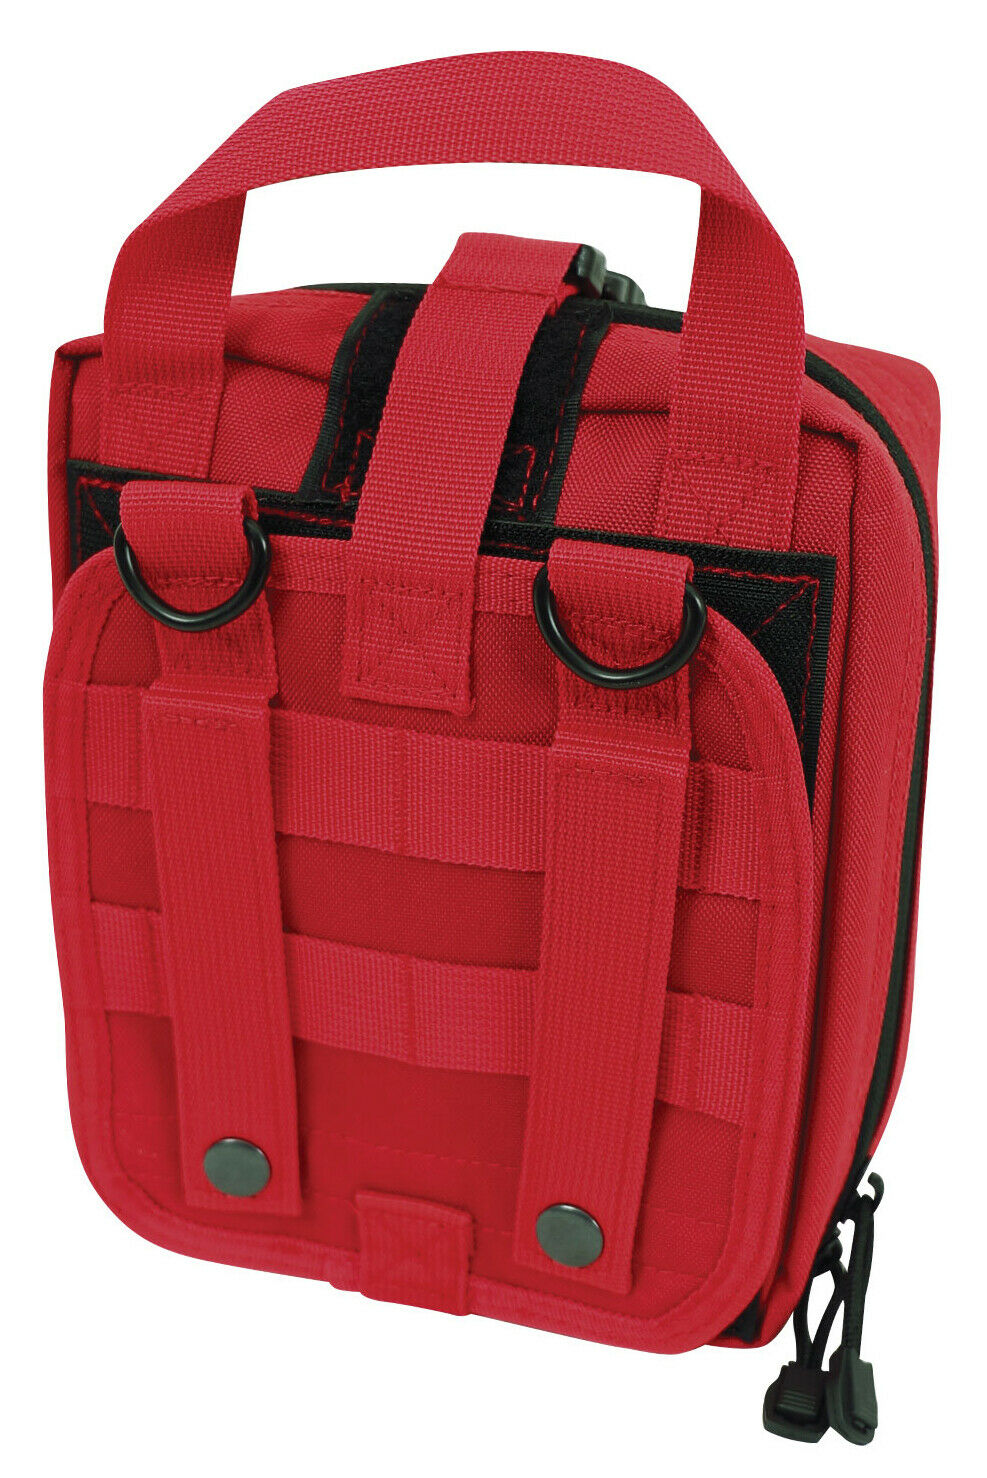 Rothco Tactical MOLLE Breakaway Pouch - Red